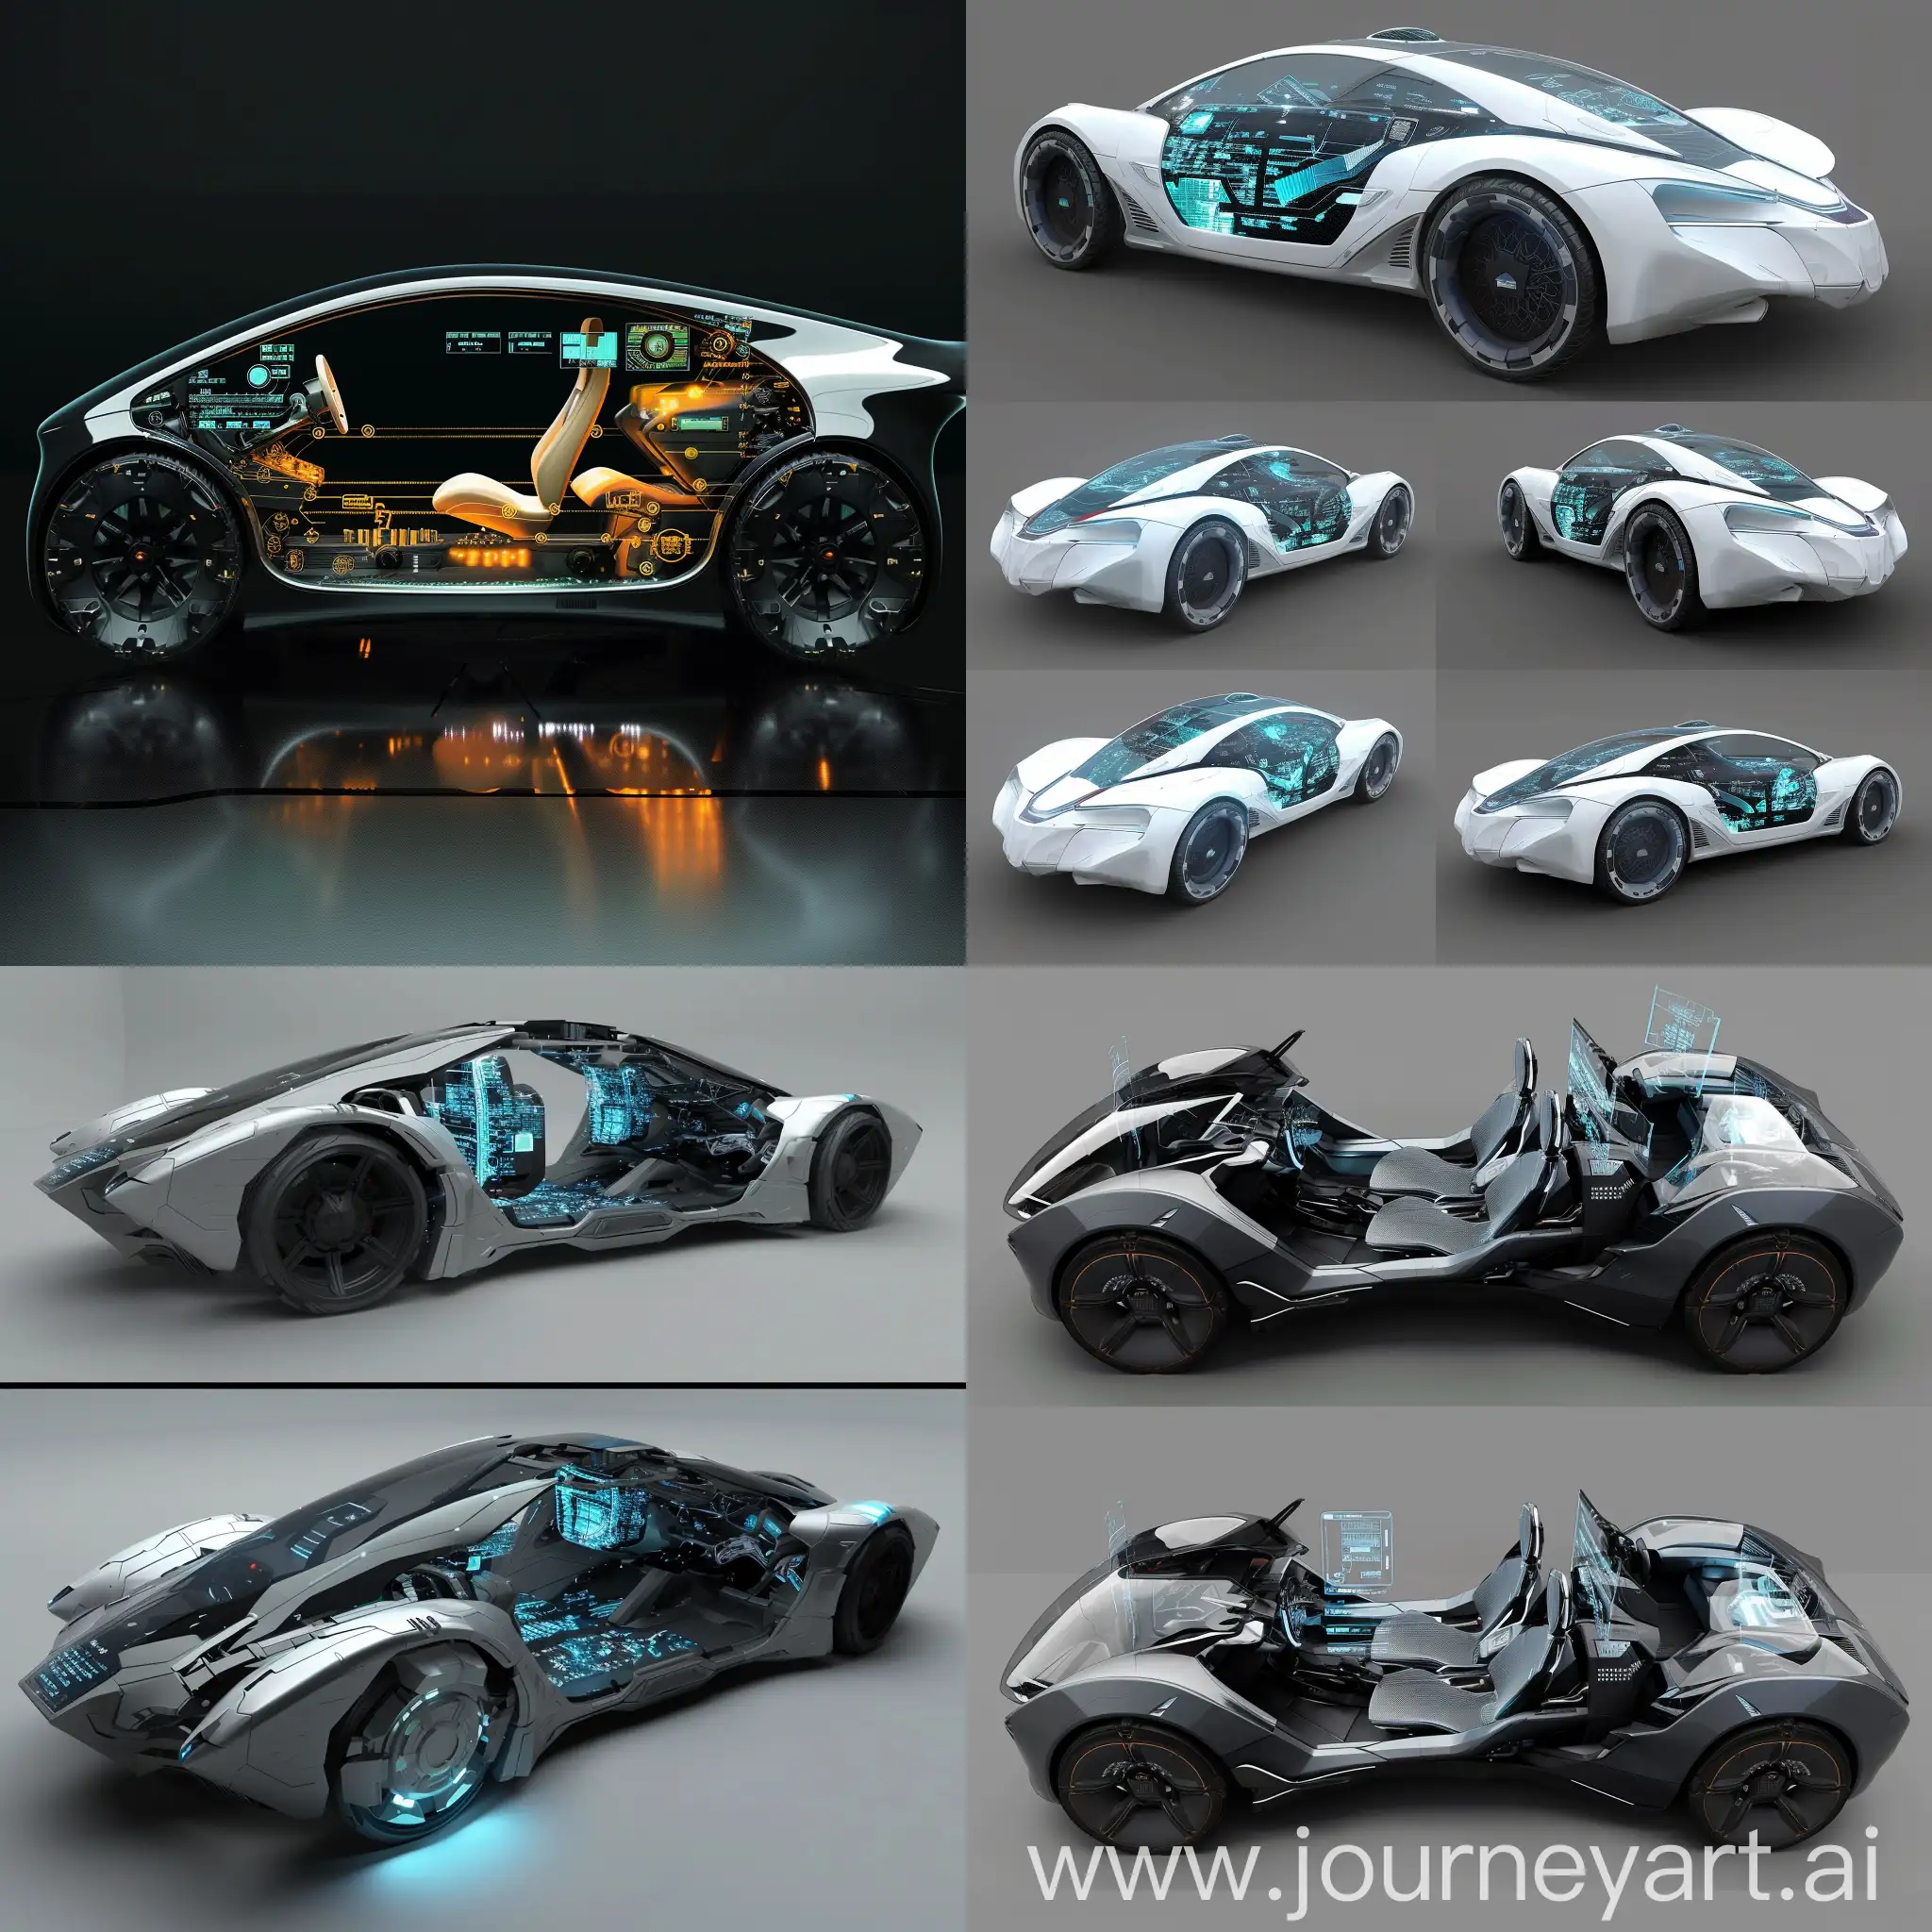 Futuristic-Car-with-Holographic-Displays-and-Smart-Seats